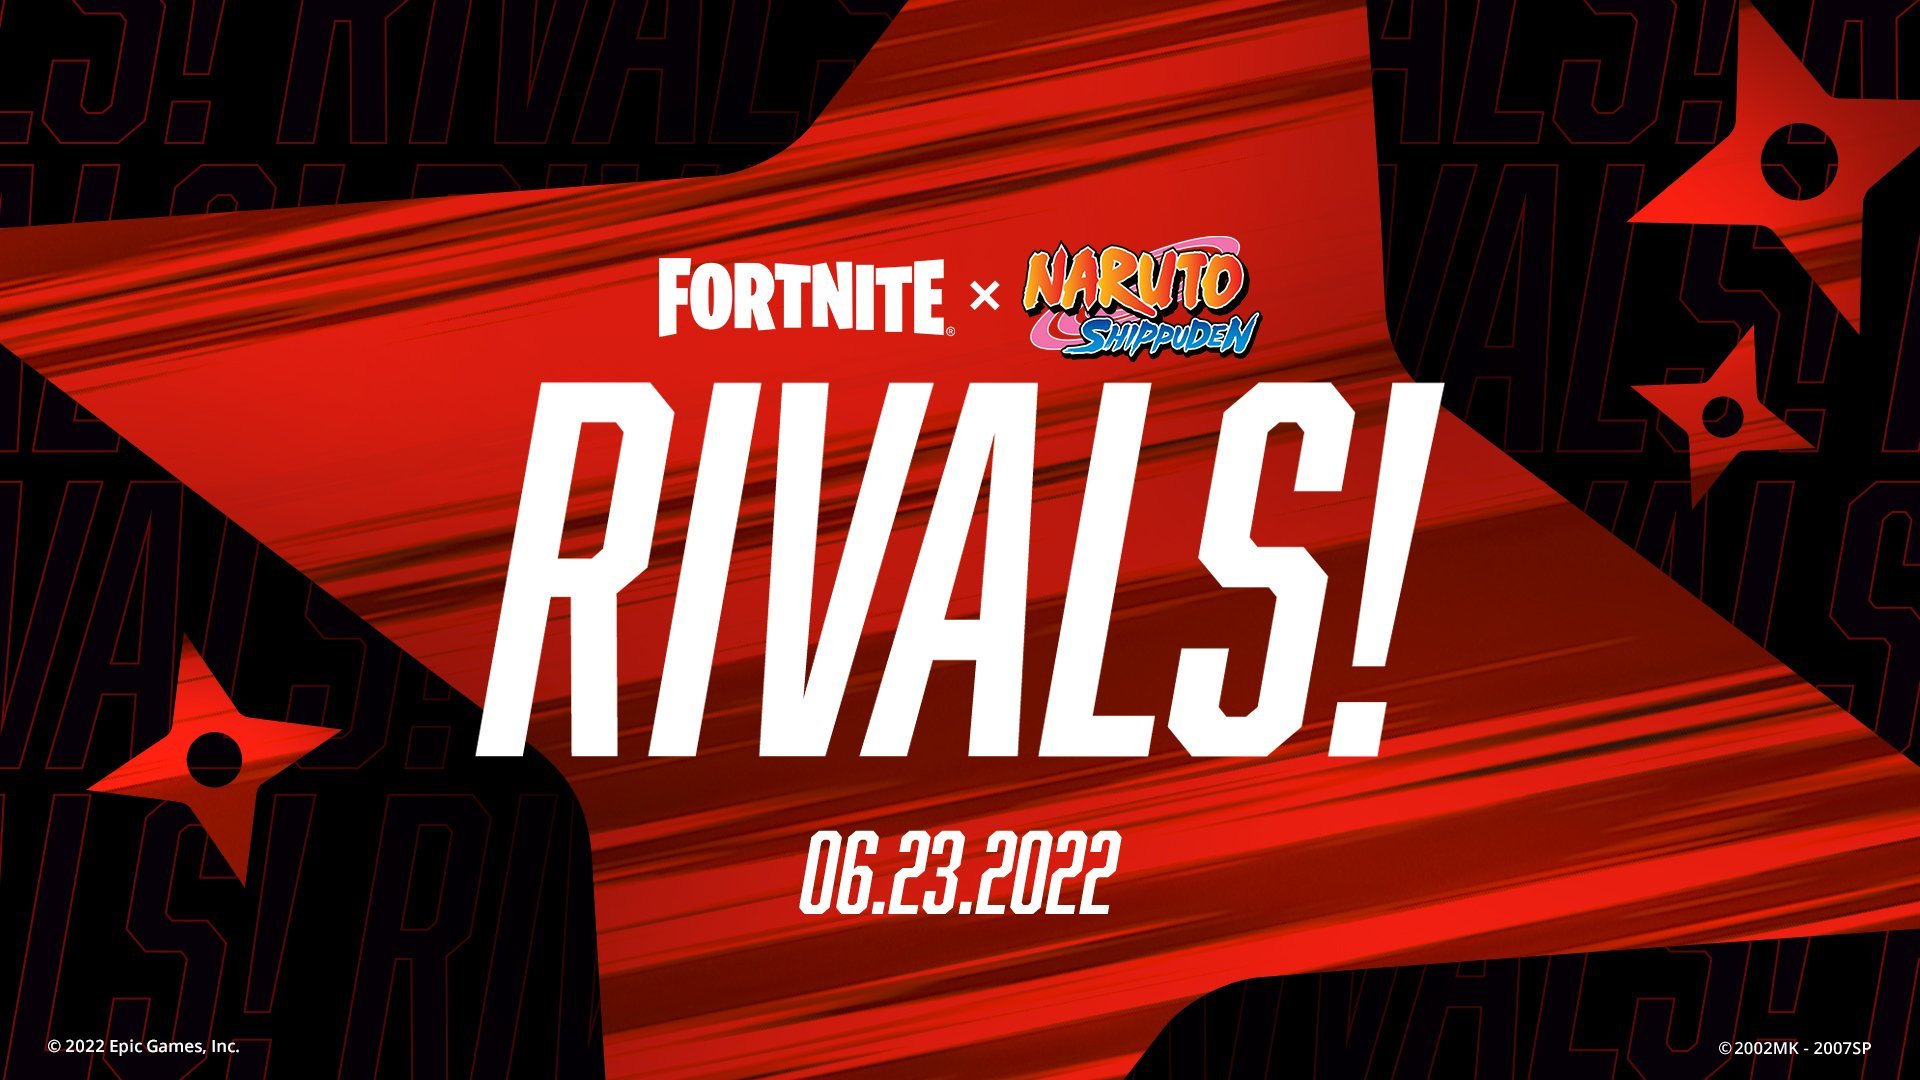 Fortnite and Naruto Rivals logo with a release date of June 23, 2022